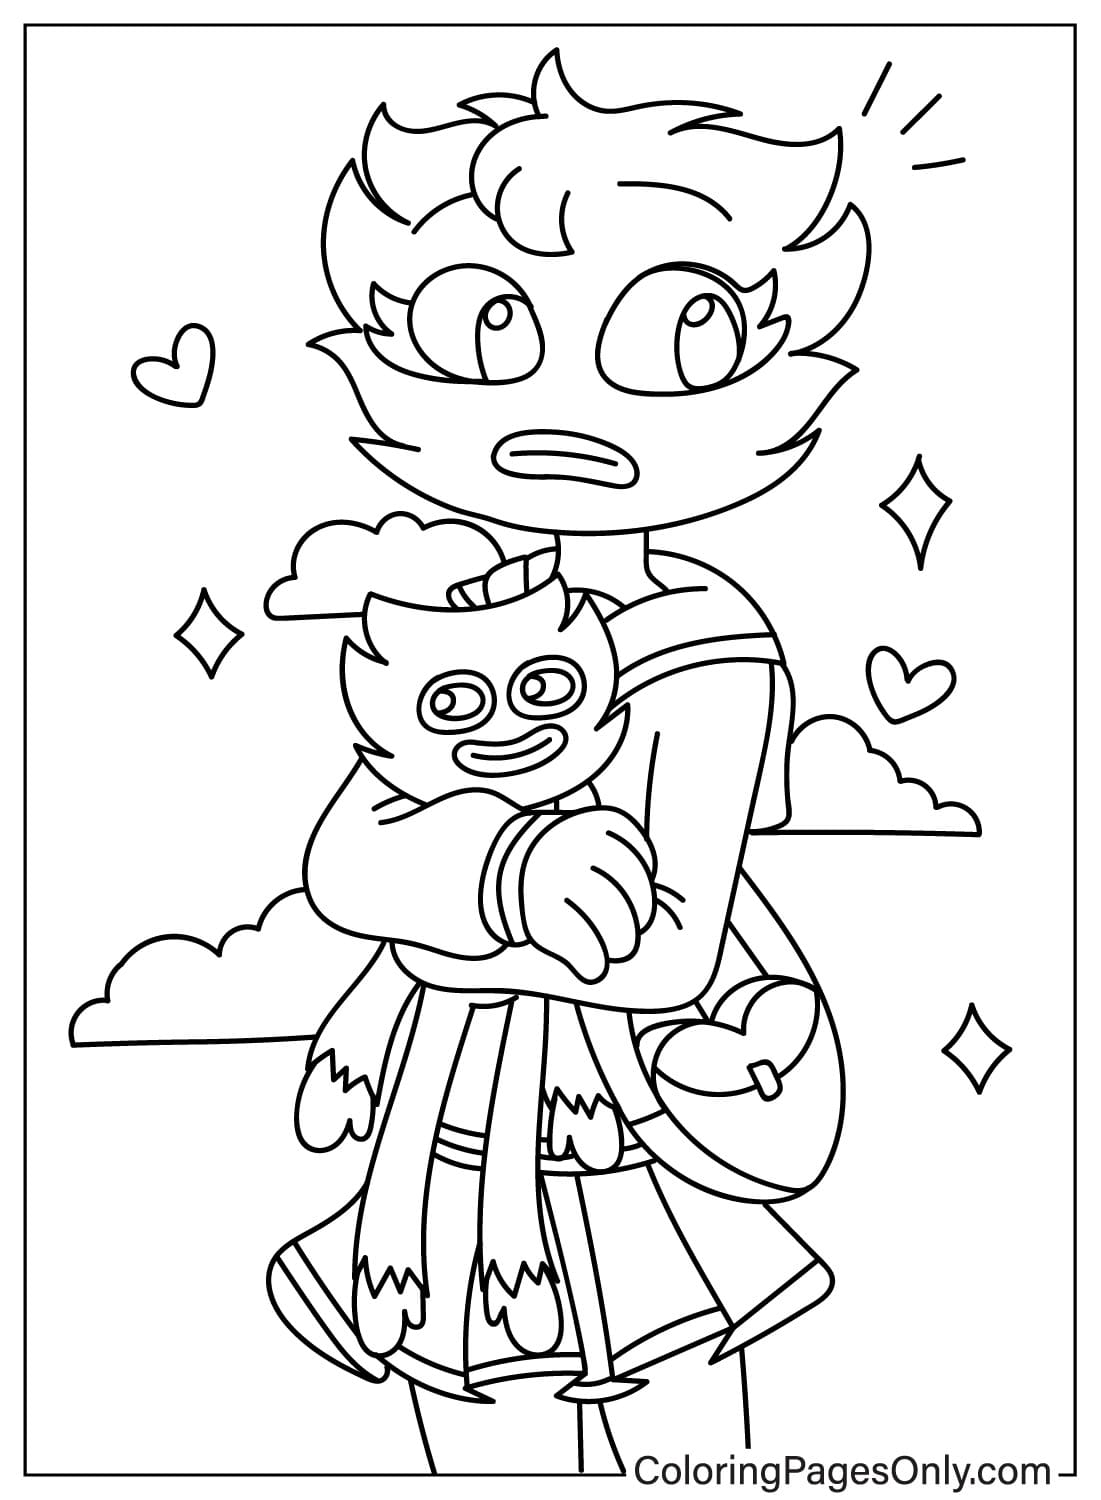 Huggy Wuggy, Kissy Missy Coloring Page from Poppy Playtime